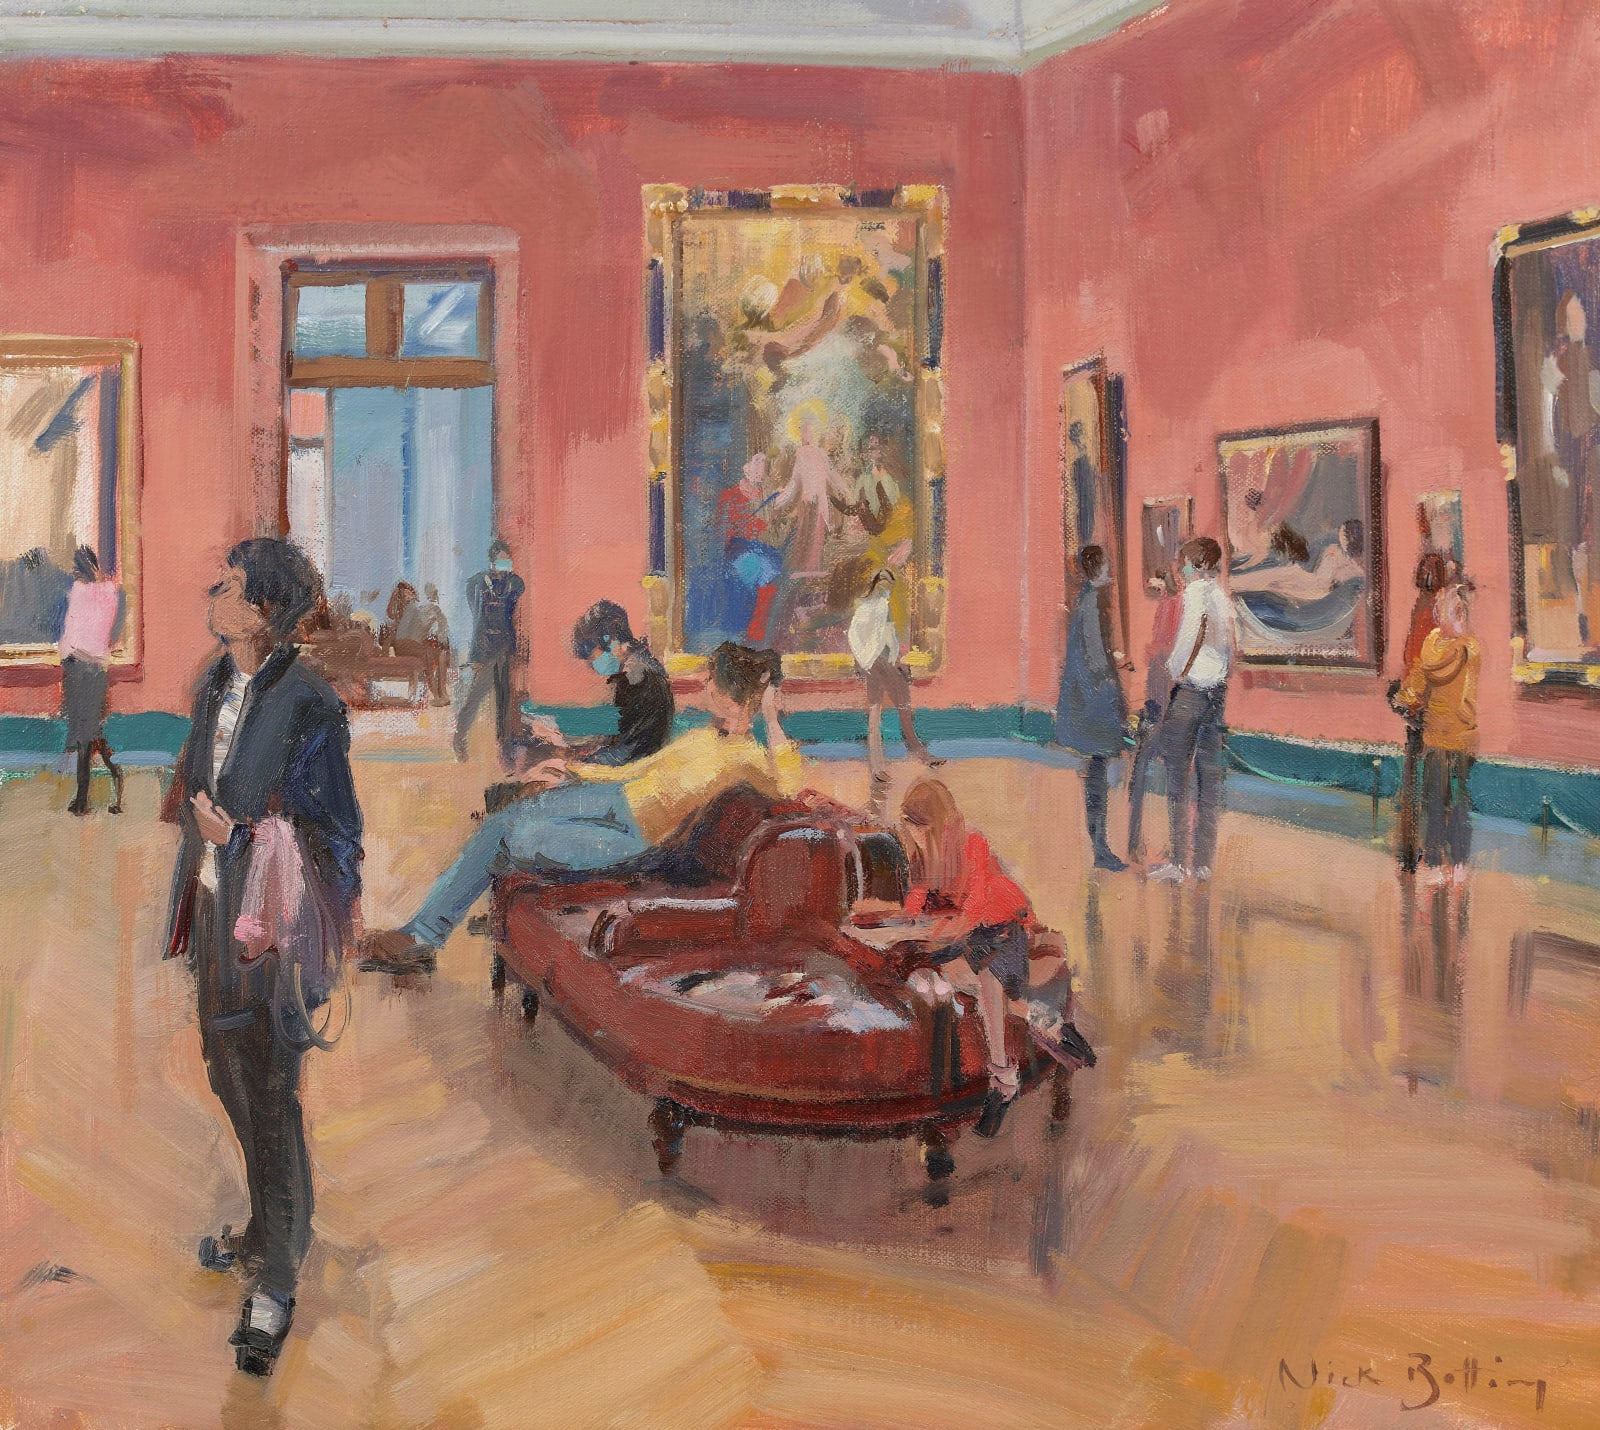 Nick Botting, The Spanish Room at The National Gallery